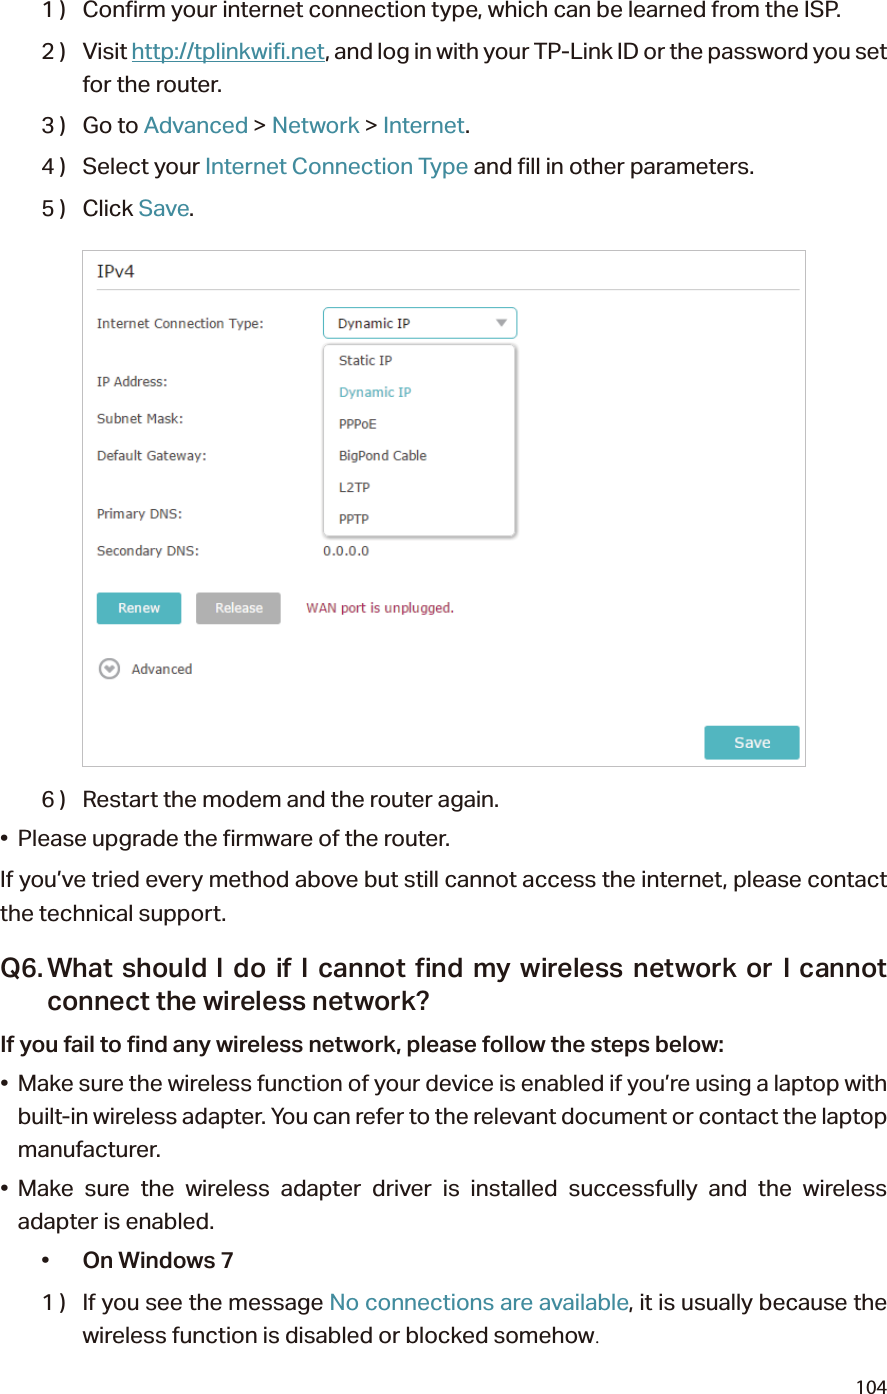 1041 )  Confirm your internet connection type, which can be learned from the ISP.2 )  Visit http://tplinkwifi.net, and log in with your TP-Link ID or the password you set for the router.3 )  Go to Advanced &gt; Network &gt; Internet.4 )  Select your Internet Connection Type and fill in other parameters.5 )  Click Save.6 )  Restart the modem and the router again.•  Please upgrade the firmware of the router.If you’ve tried every method above but still cannot access the internet, please contact the technical support.Q6. What should I do if I cannot find my wireless network or I cannot connect the wireless network?If you fail to find any wireless network, please follow the steps below:•  Make sure the wireless function of your device is enabled if you’re using a laptop with built-in wireless adapter. You can refer to the relevant document or contact the laptop manufacturer.• Make sure the wireless adapter driver is installed successfully and the wireless adapter is enabled.•  On Windows 71 )  If you see the message No connections are available, it is usually because the wireless function is disabled or blocked somehow.